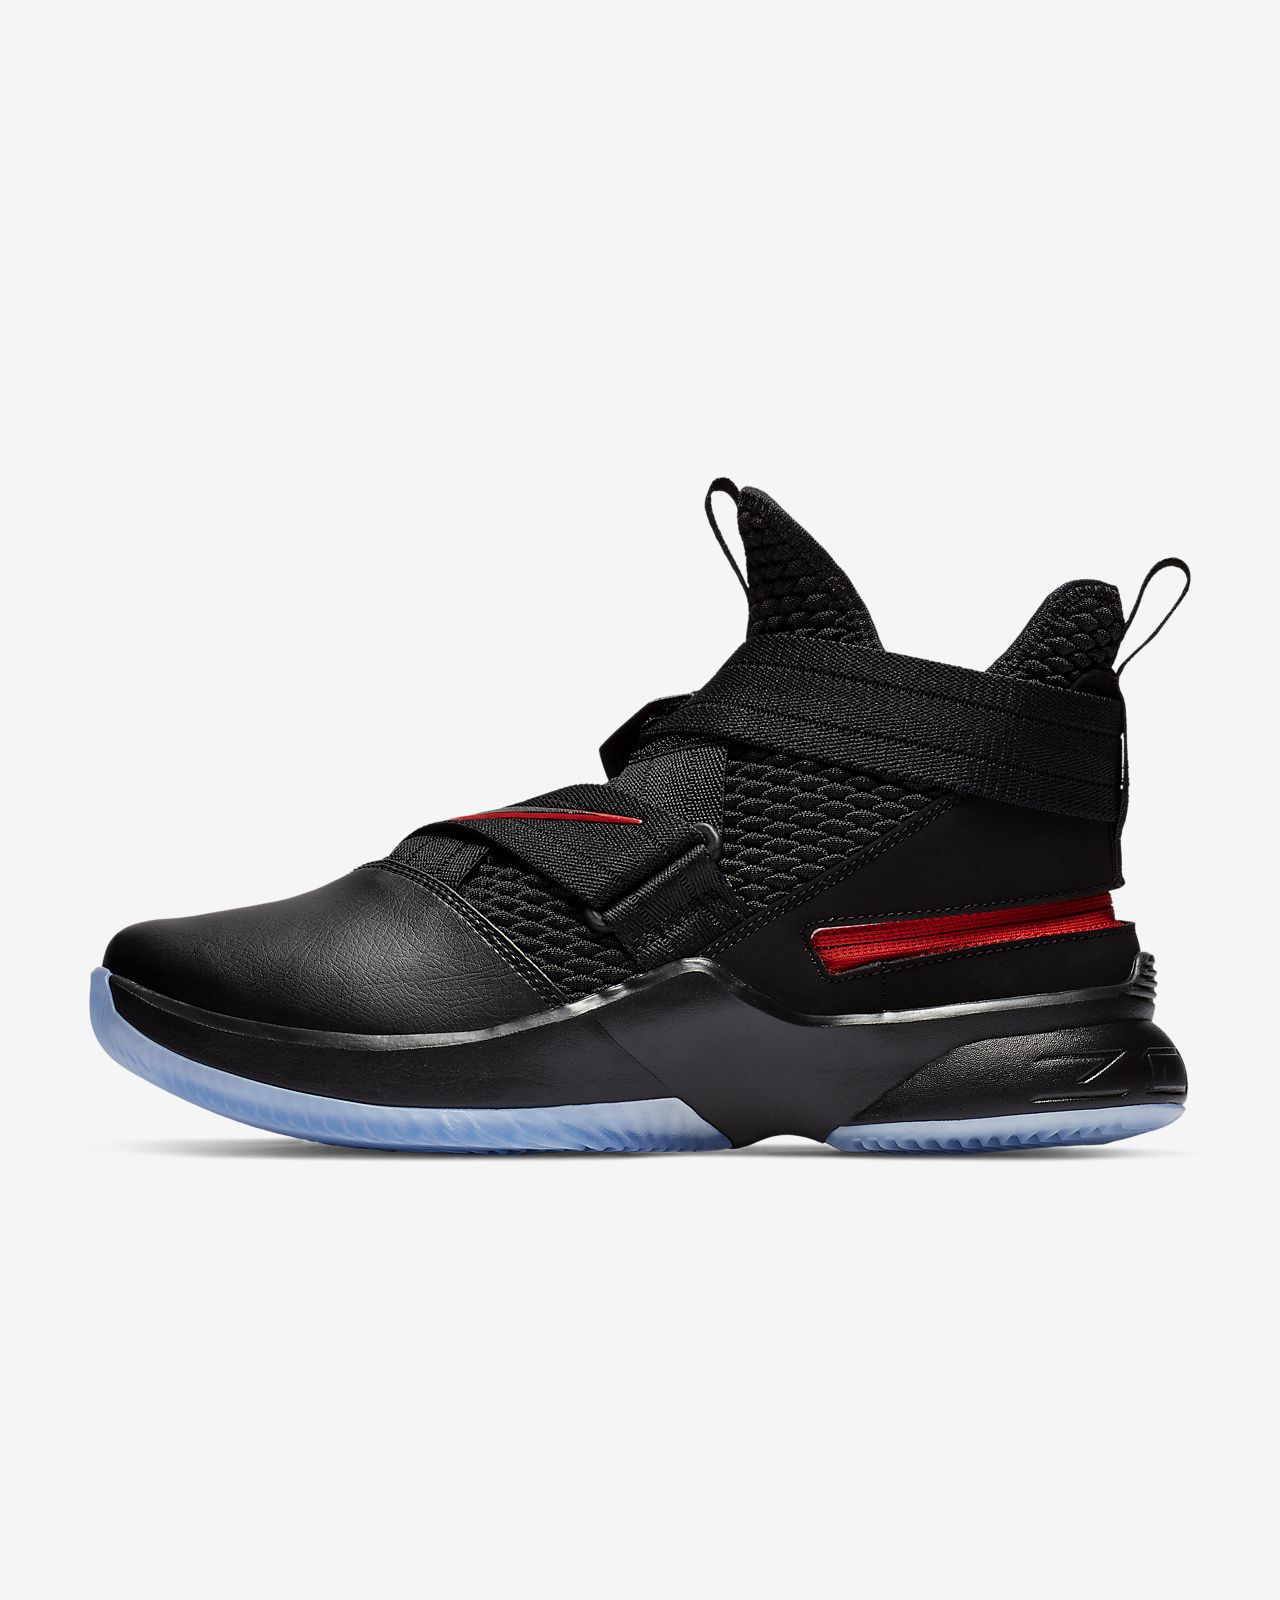 nike lebron soldier 12 flyease cheap online